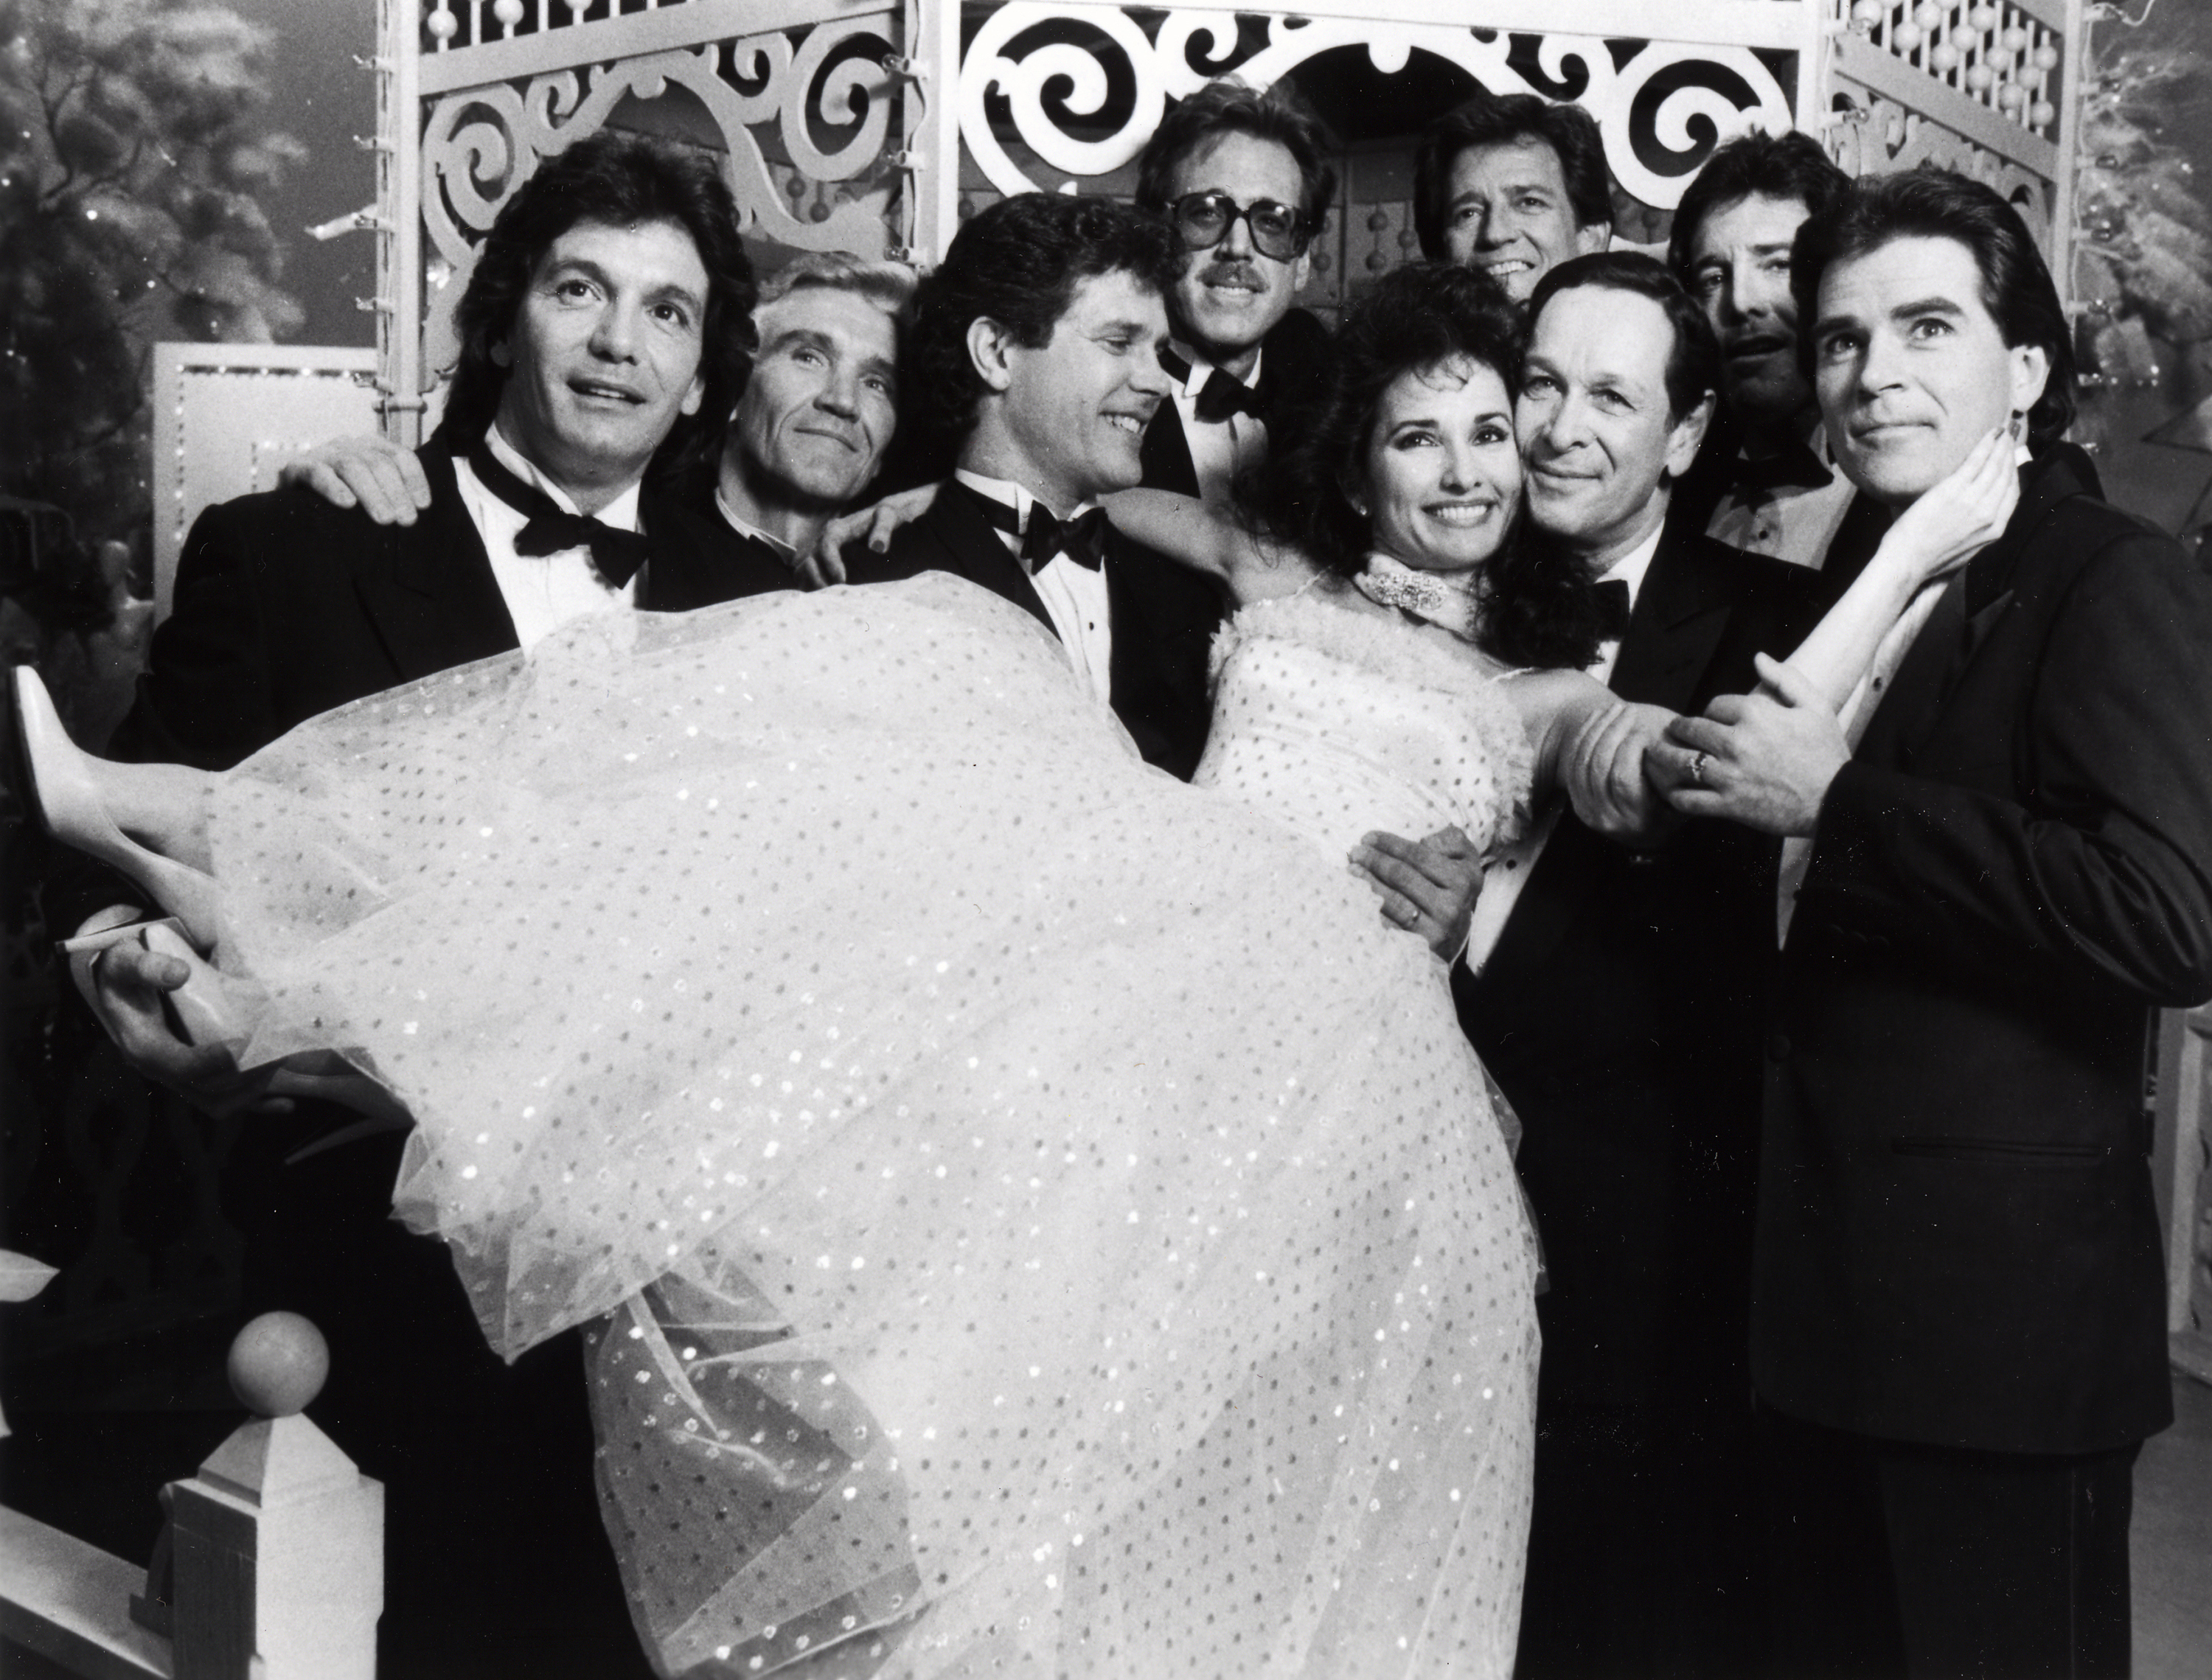 Susan Lucci, Jean LeClerc, David Canary, Richard Shoberg, Nicholas Surovy, Mike Minor, Larry Keith, Nick Benedict, and Larkin Malloy in "All My Children" in 1988 | Source: Getty Images